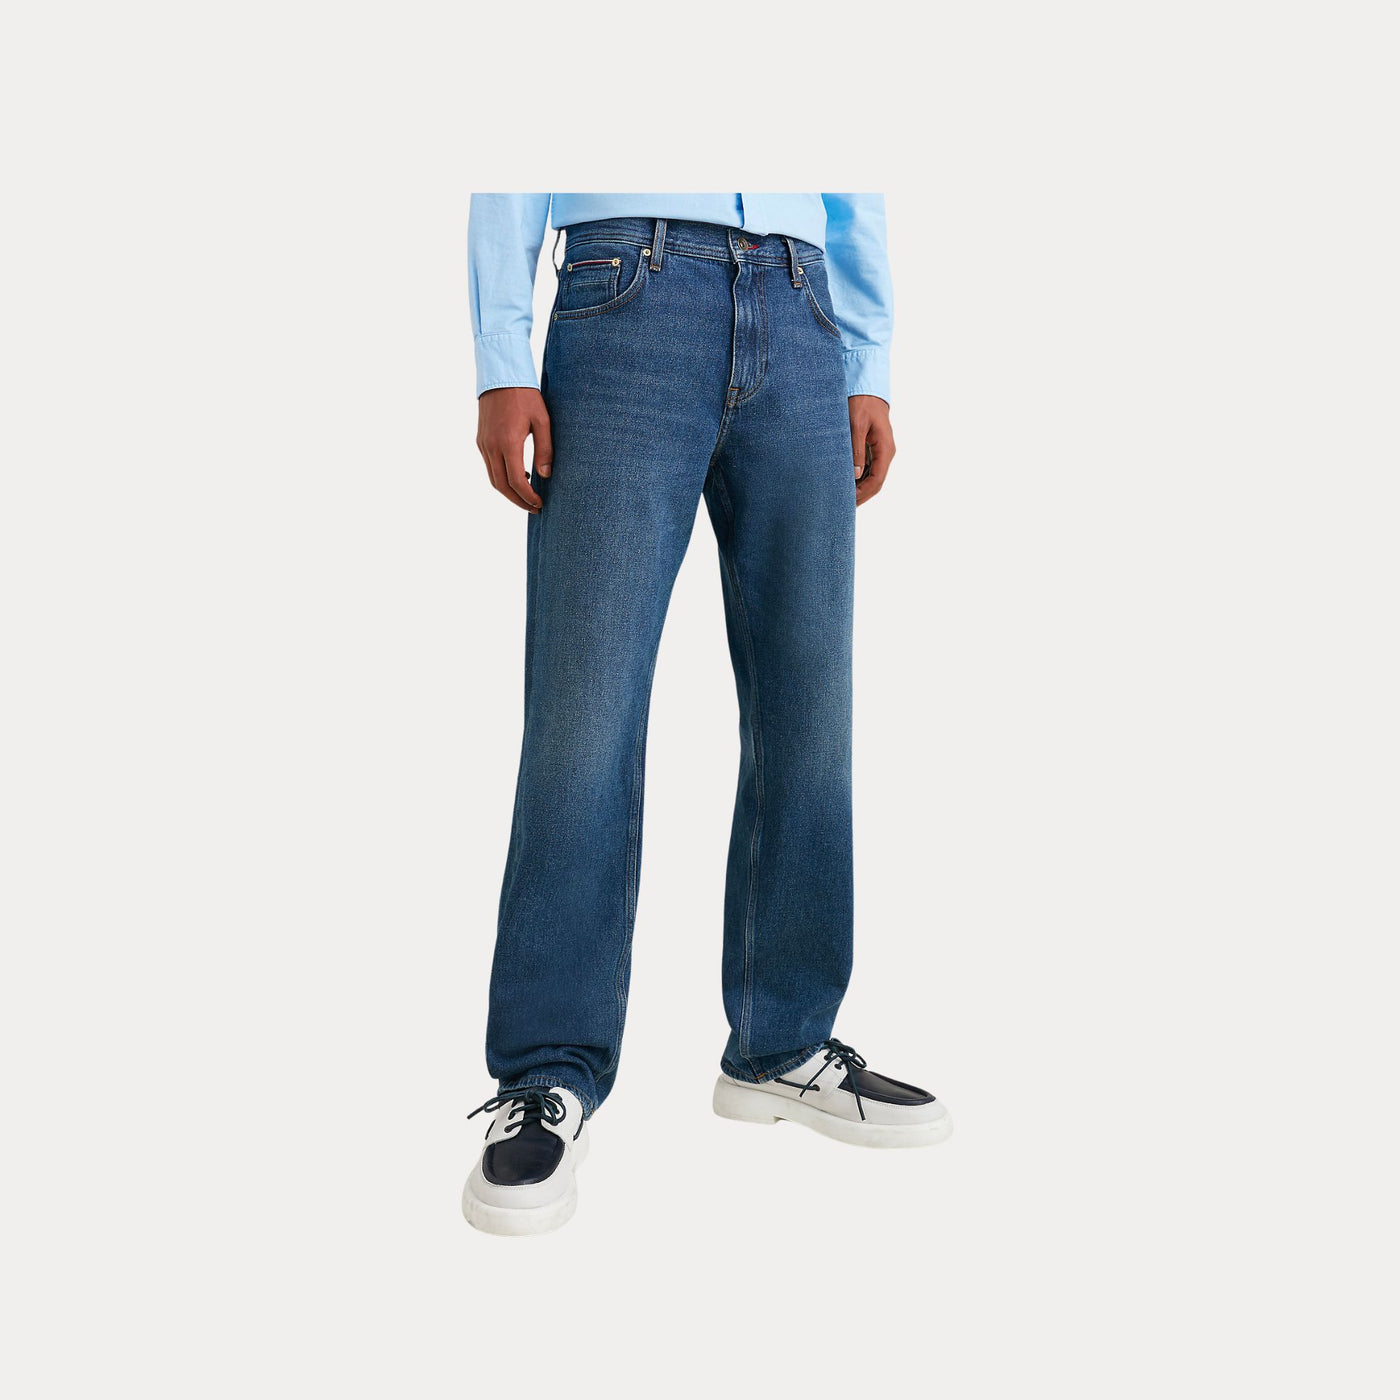 TOMMY HILFIGER - JEANS DRITTO IN CANAPA